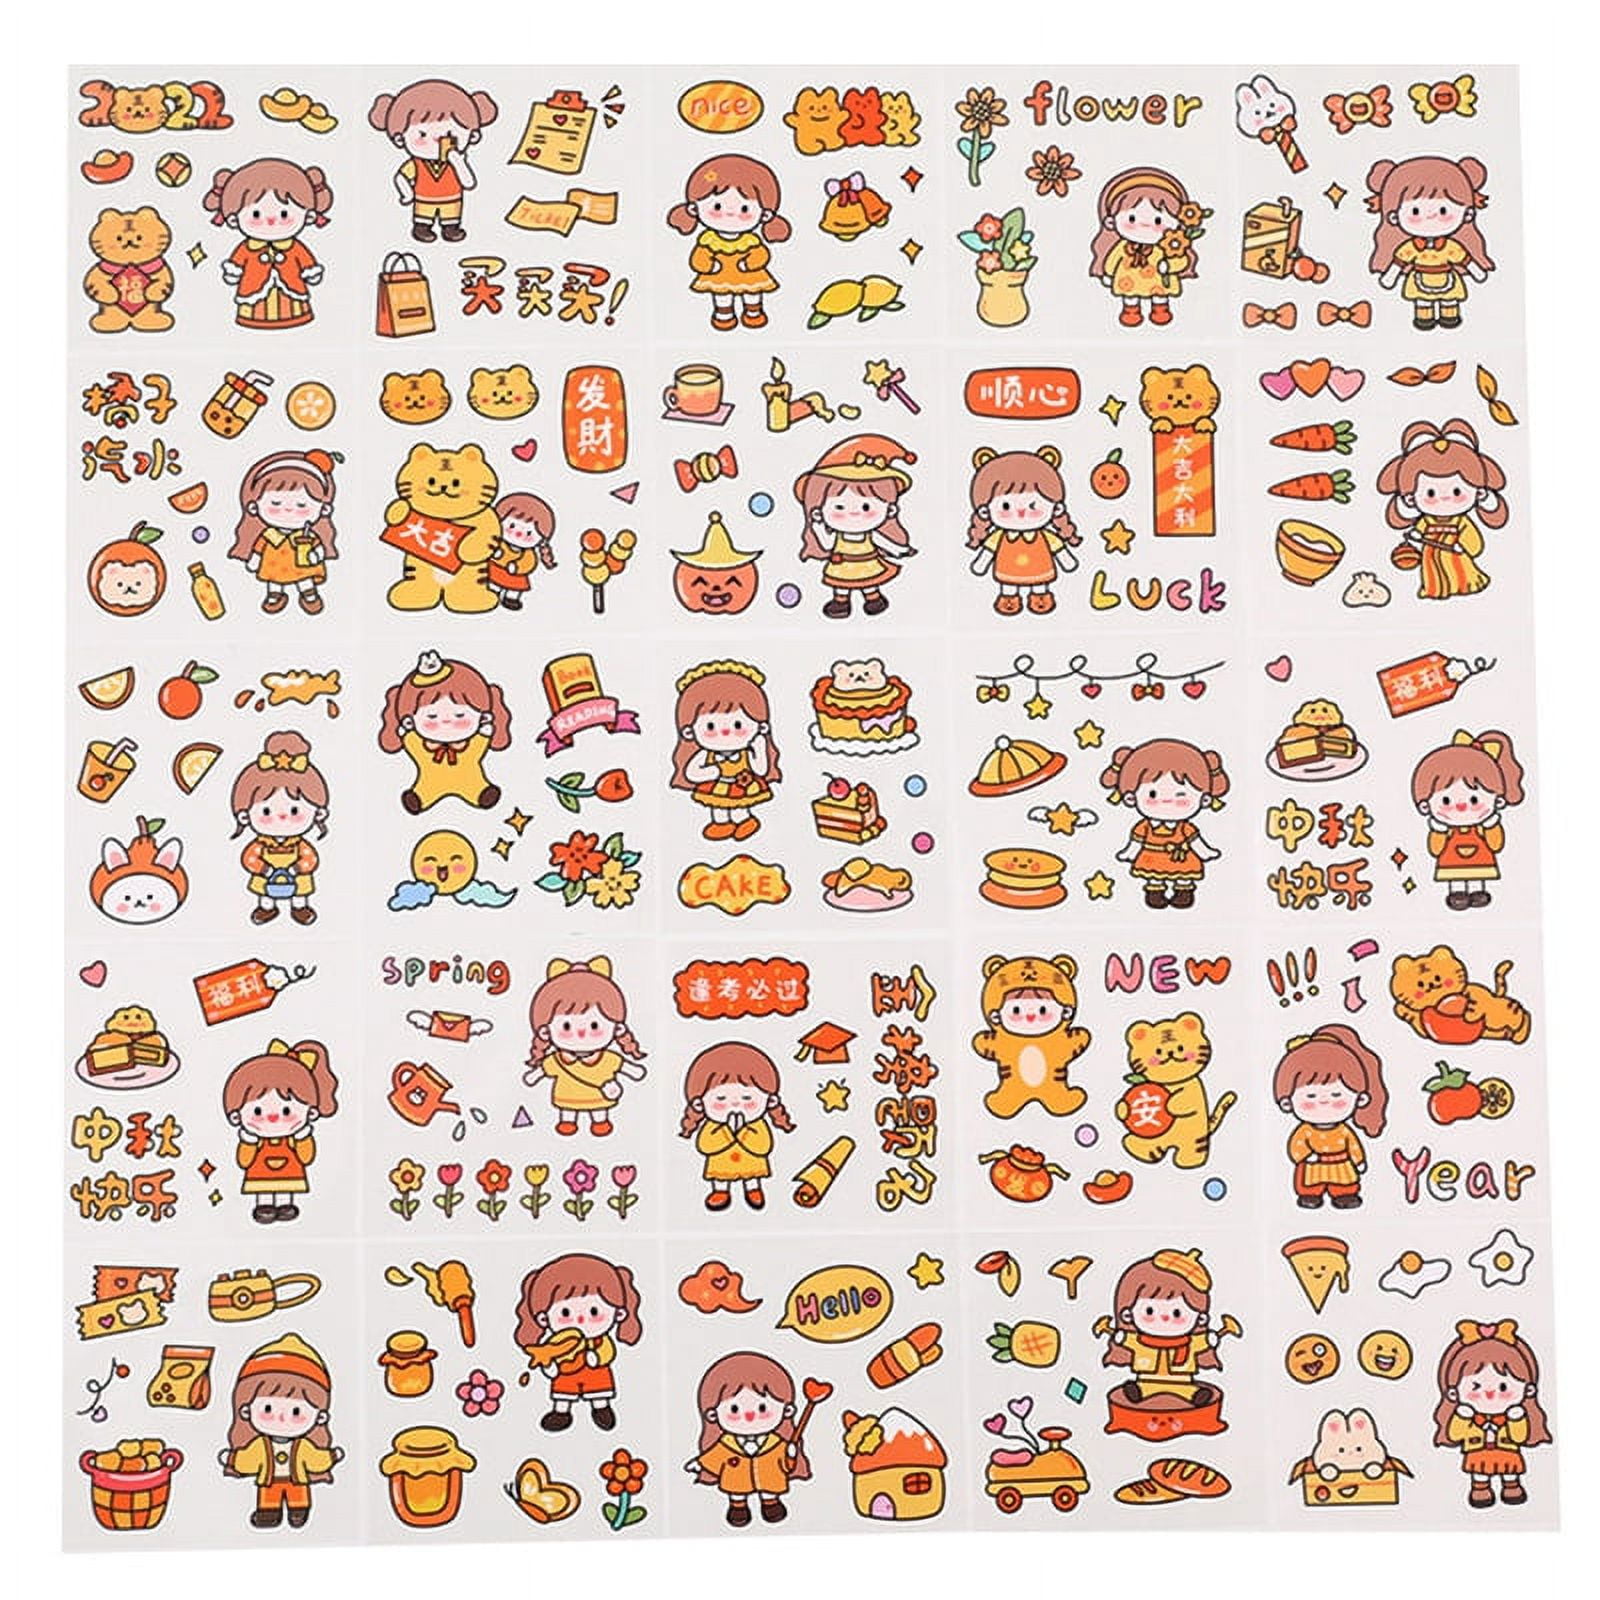 DraggmePartty Cute Girl Journal Sticker Gift Box Pet Kawaii Stationery  Scrapbooking Decoration Material Diary Phone Stickers